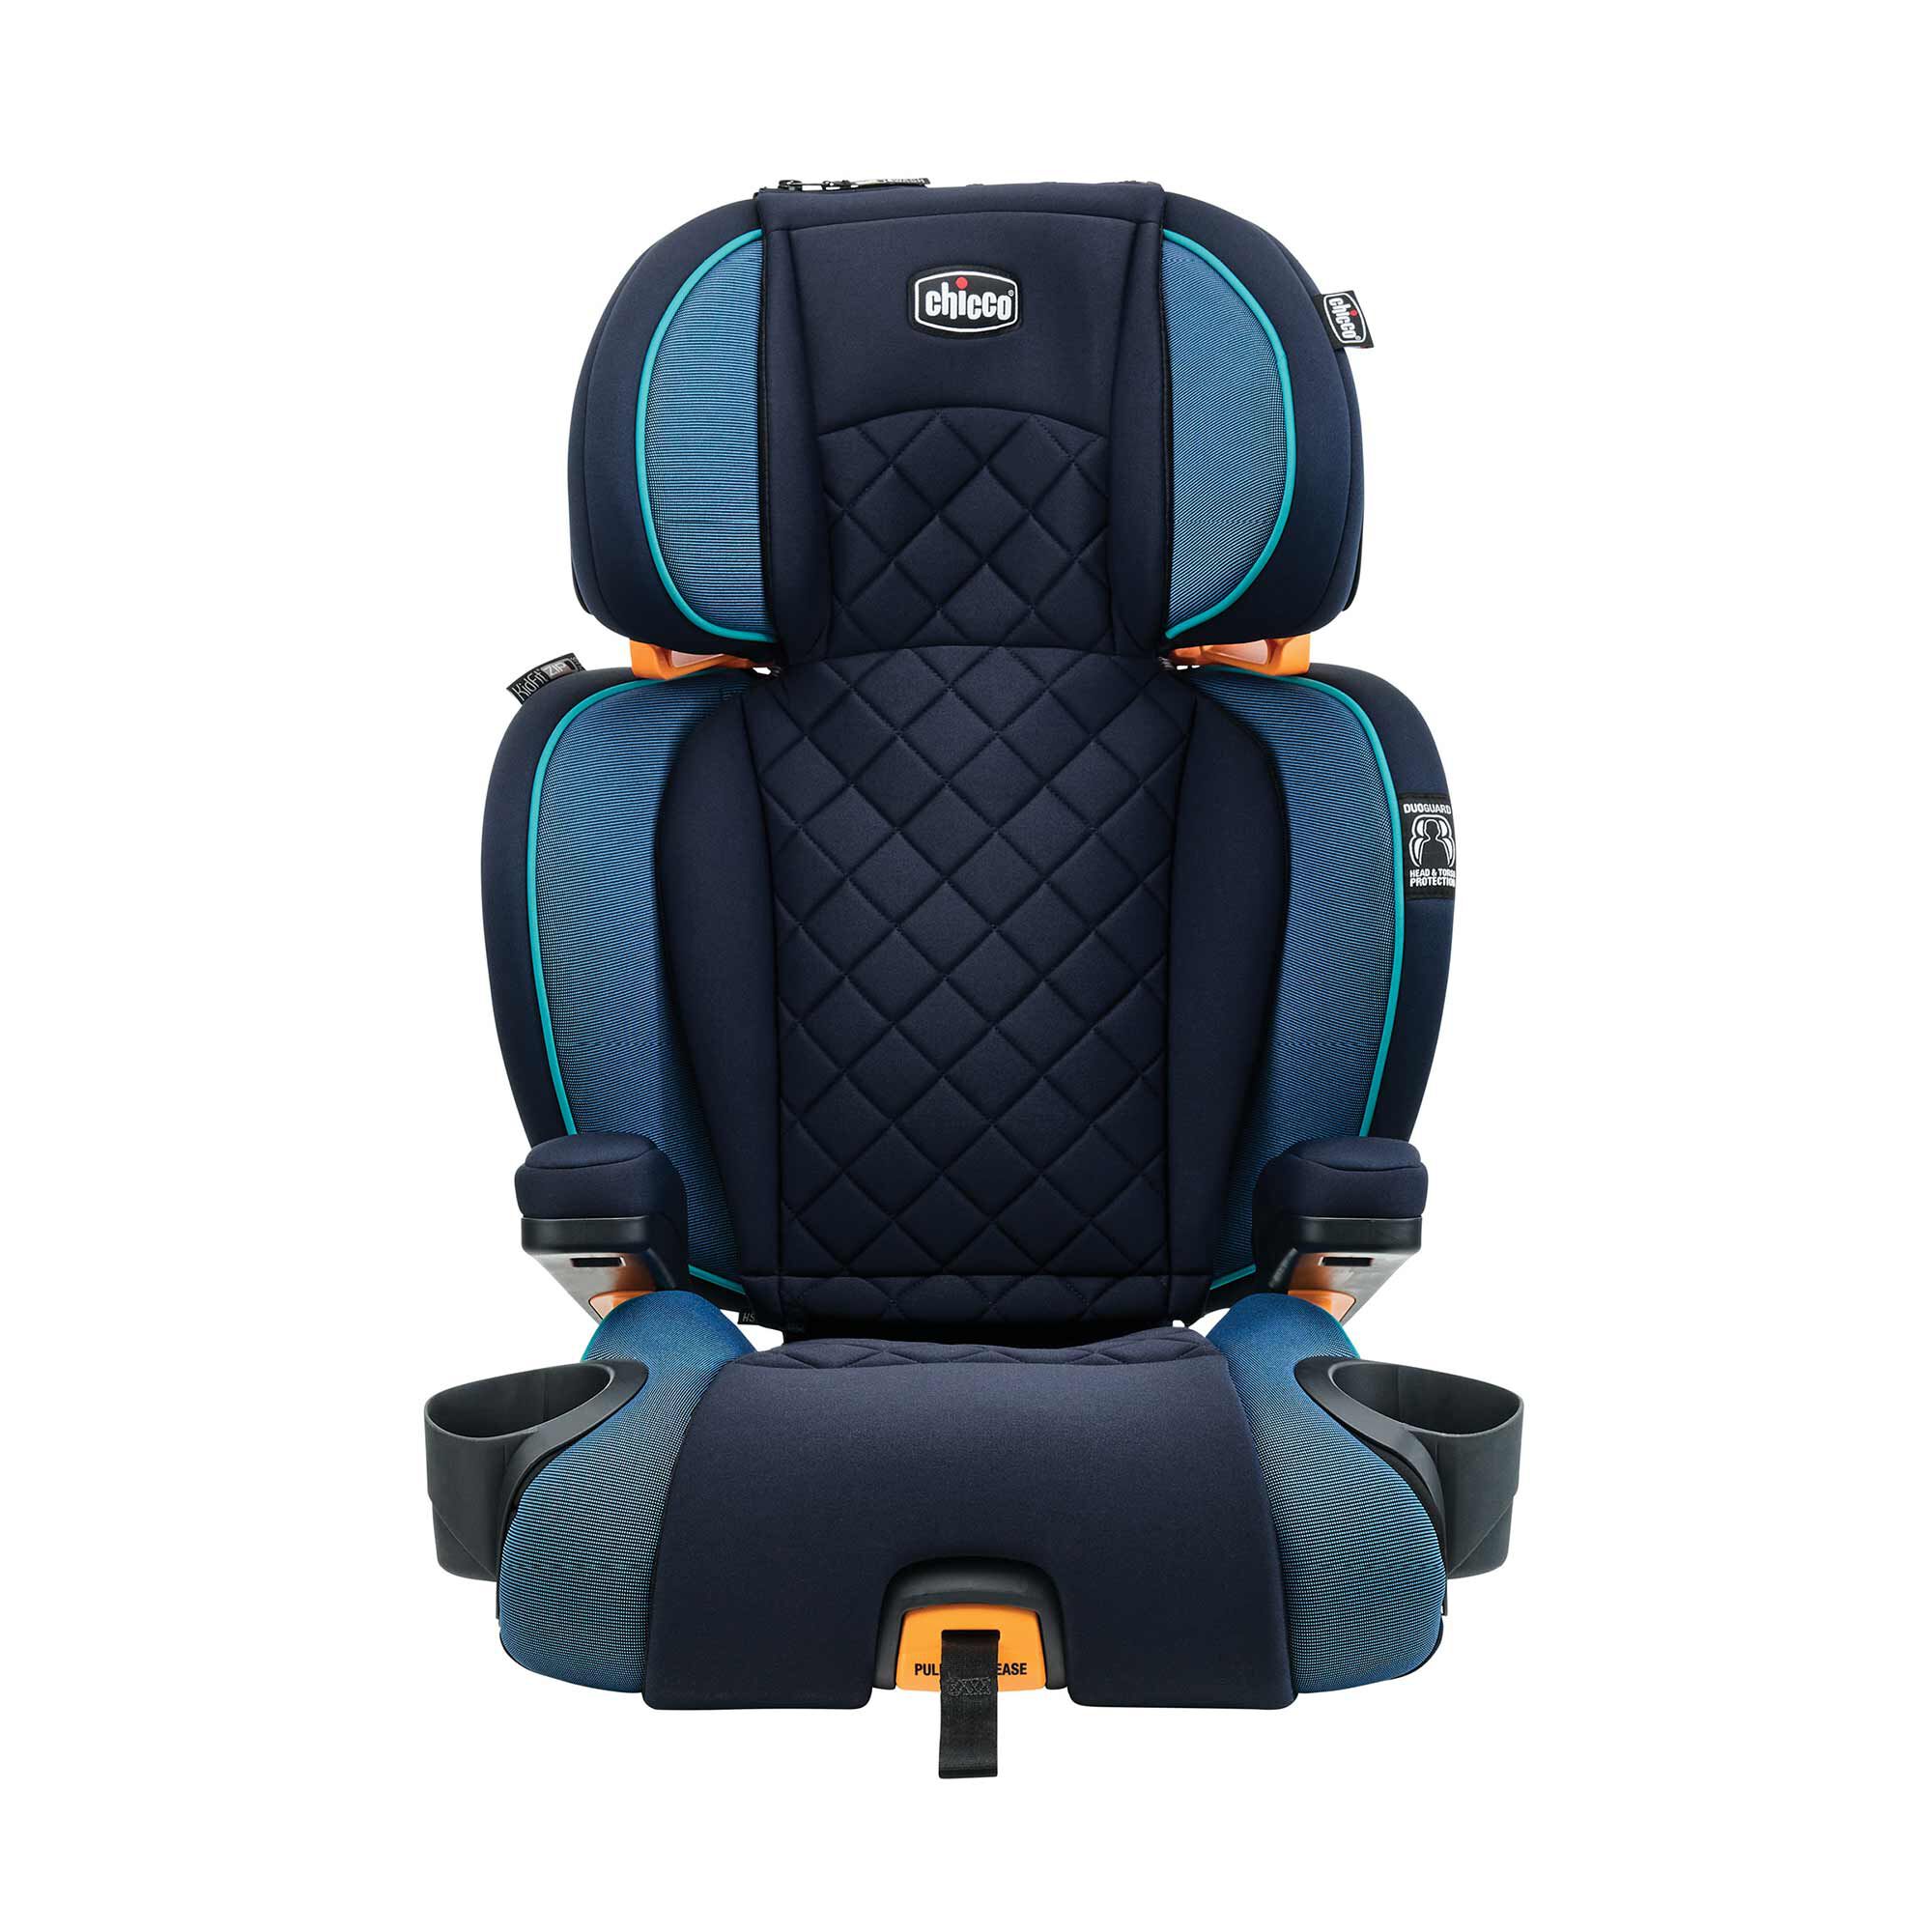 KidFit 2-in-1 Belt Positioning Booster Car Seat - Atmosphere